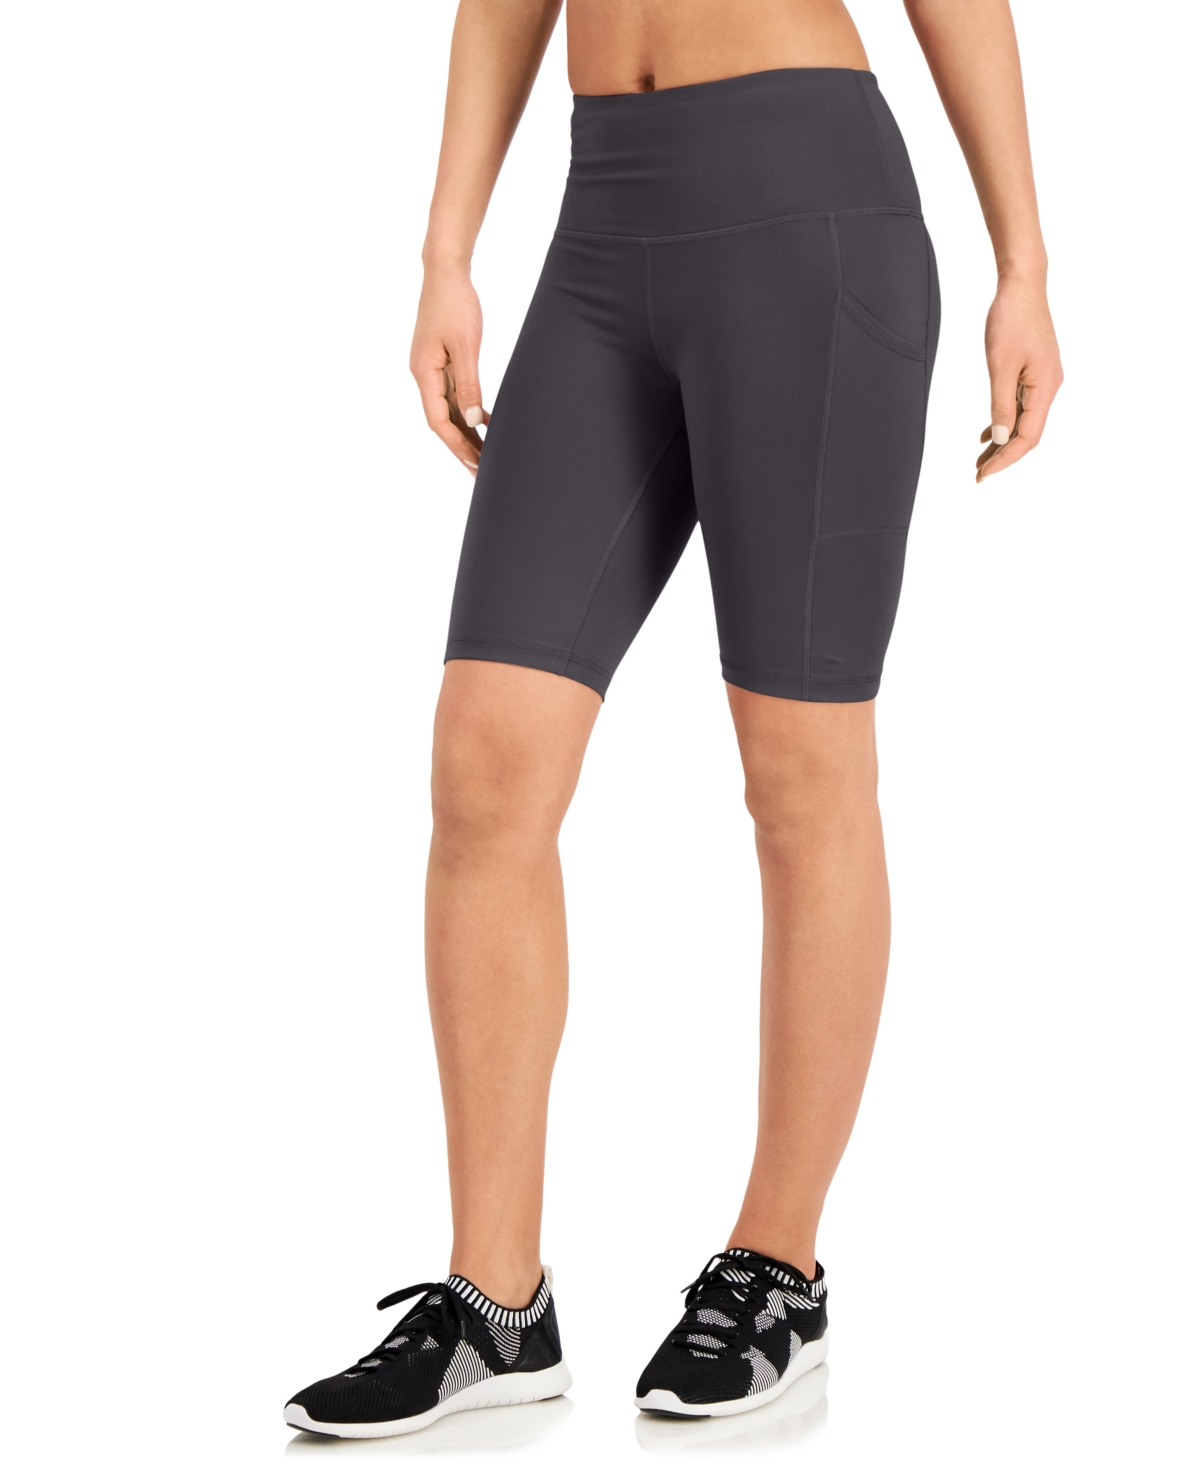 ID IDEOLOGY WOMEN'S PETITE COMPRESSION HIGH-RISE 10" BIKE SHORTS, CREATED FOR MACY'S